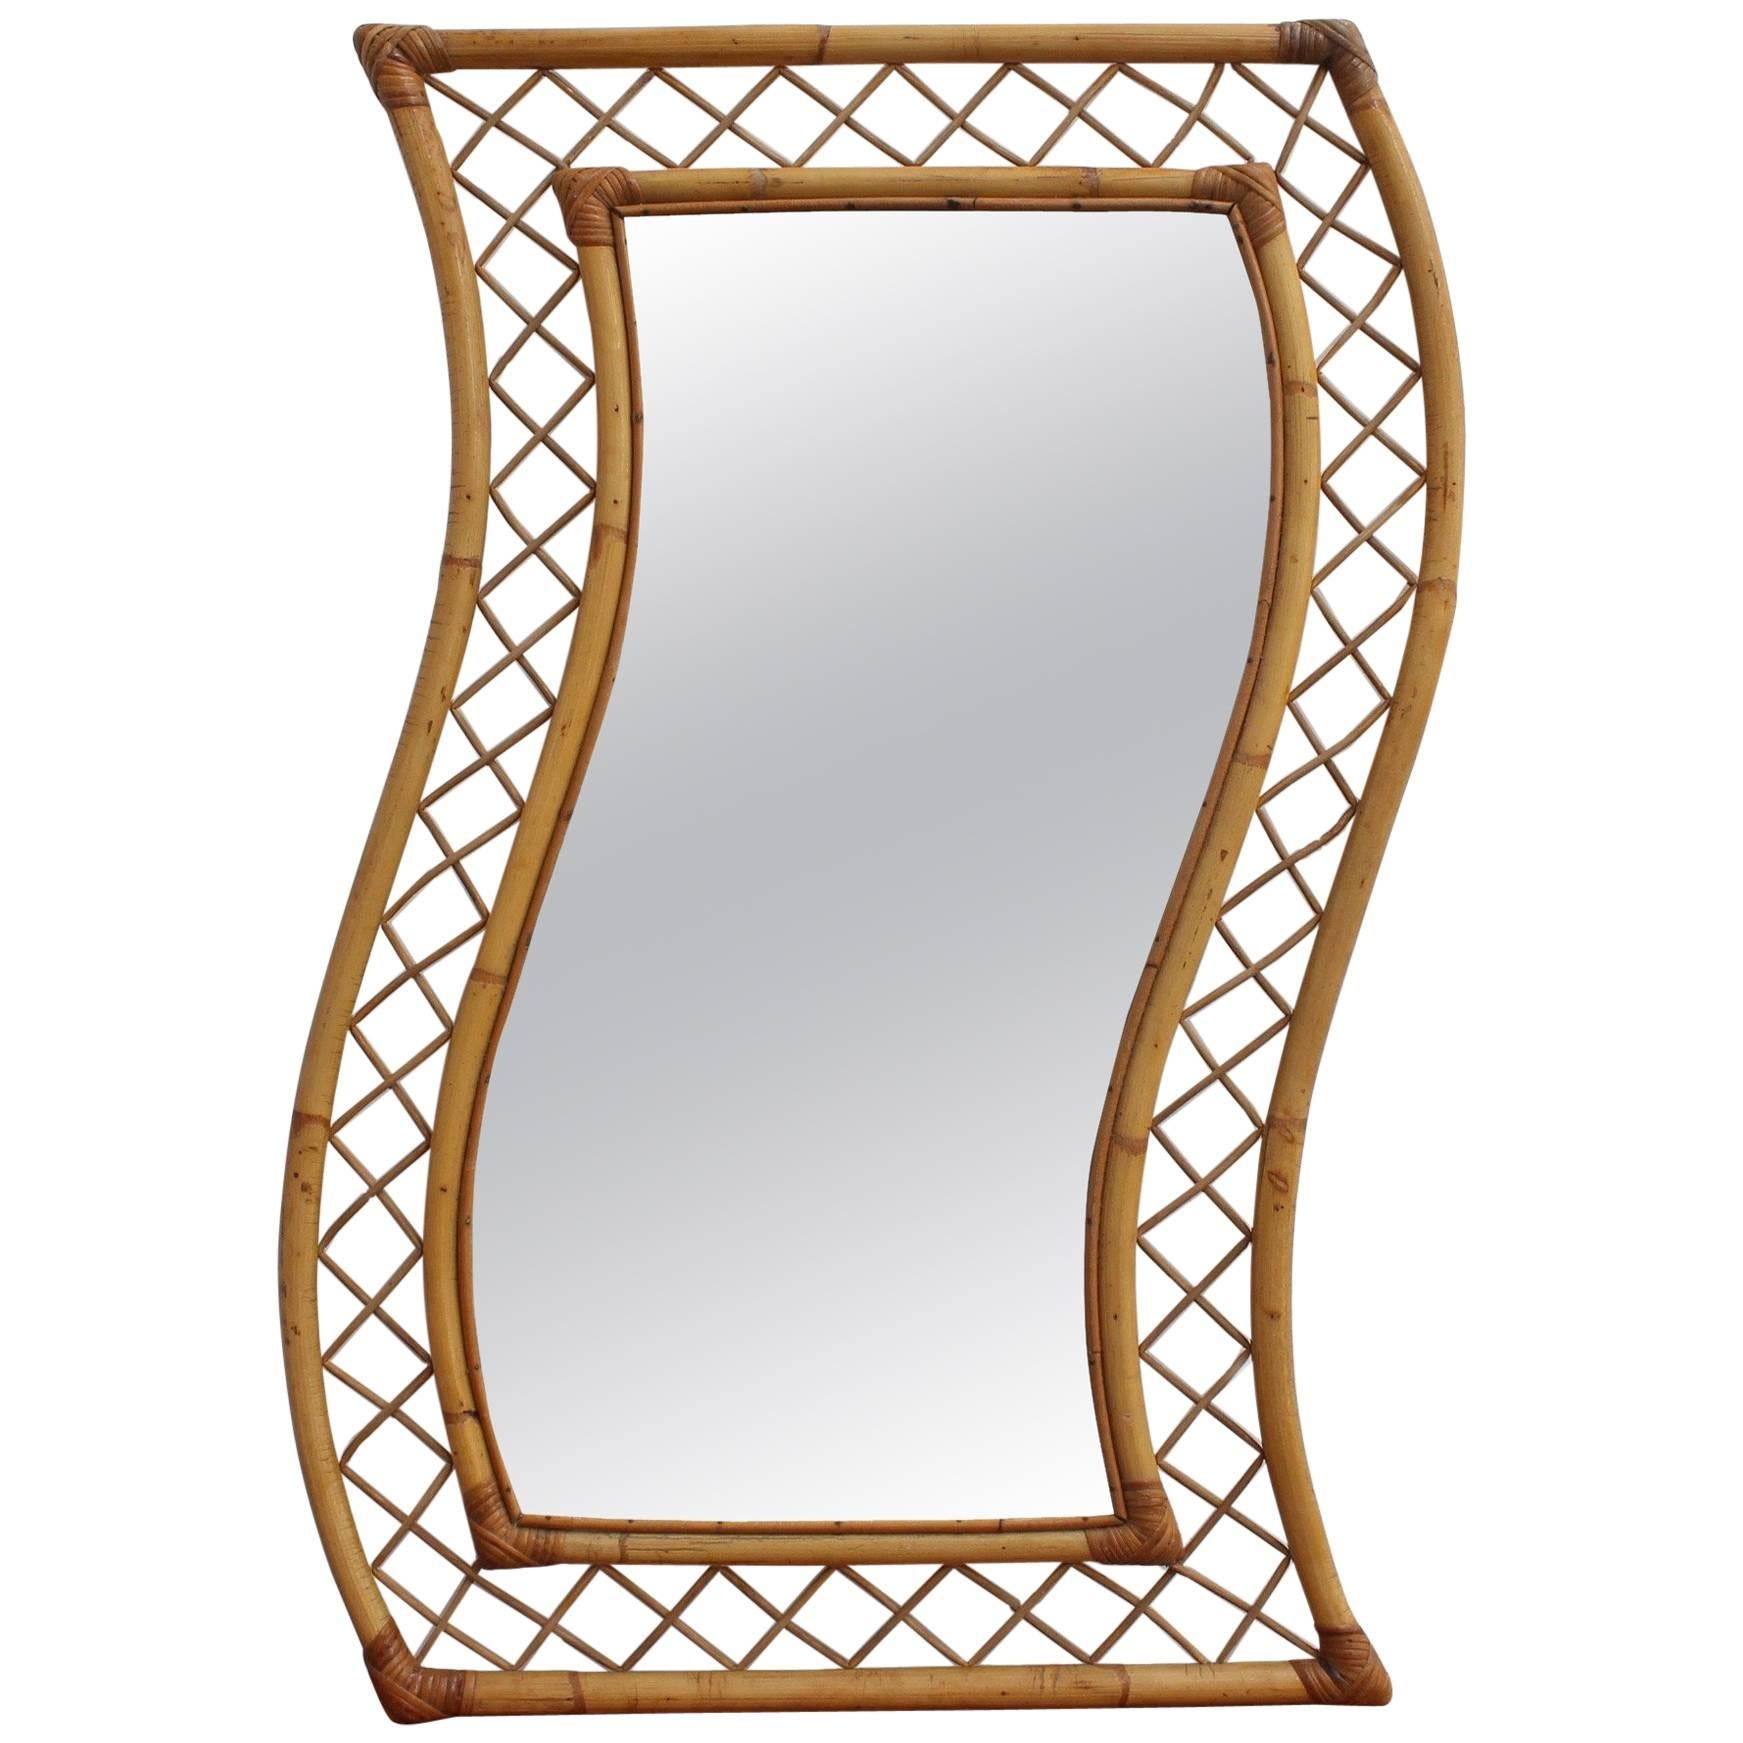 French Bamboo and Rattan Mirror, circa 1950s